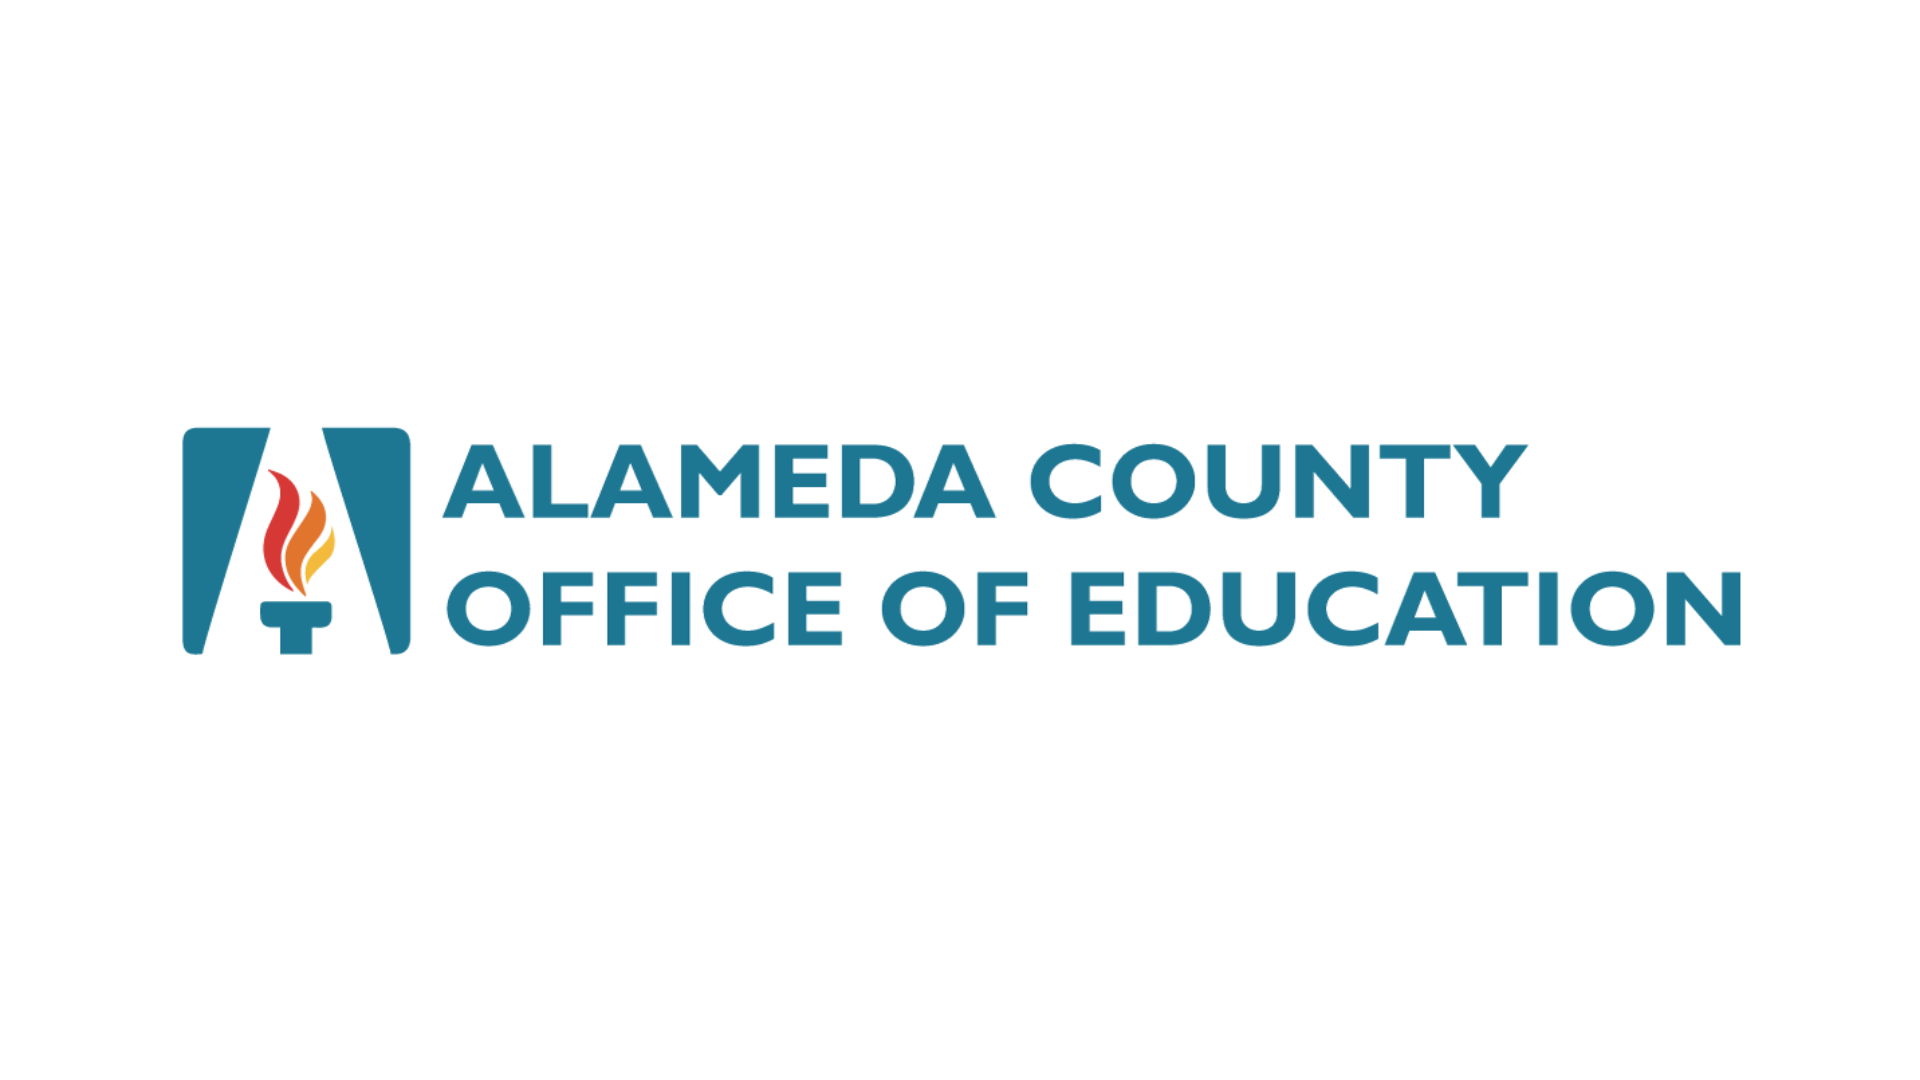 Alameda County Office of Education Logo